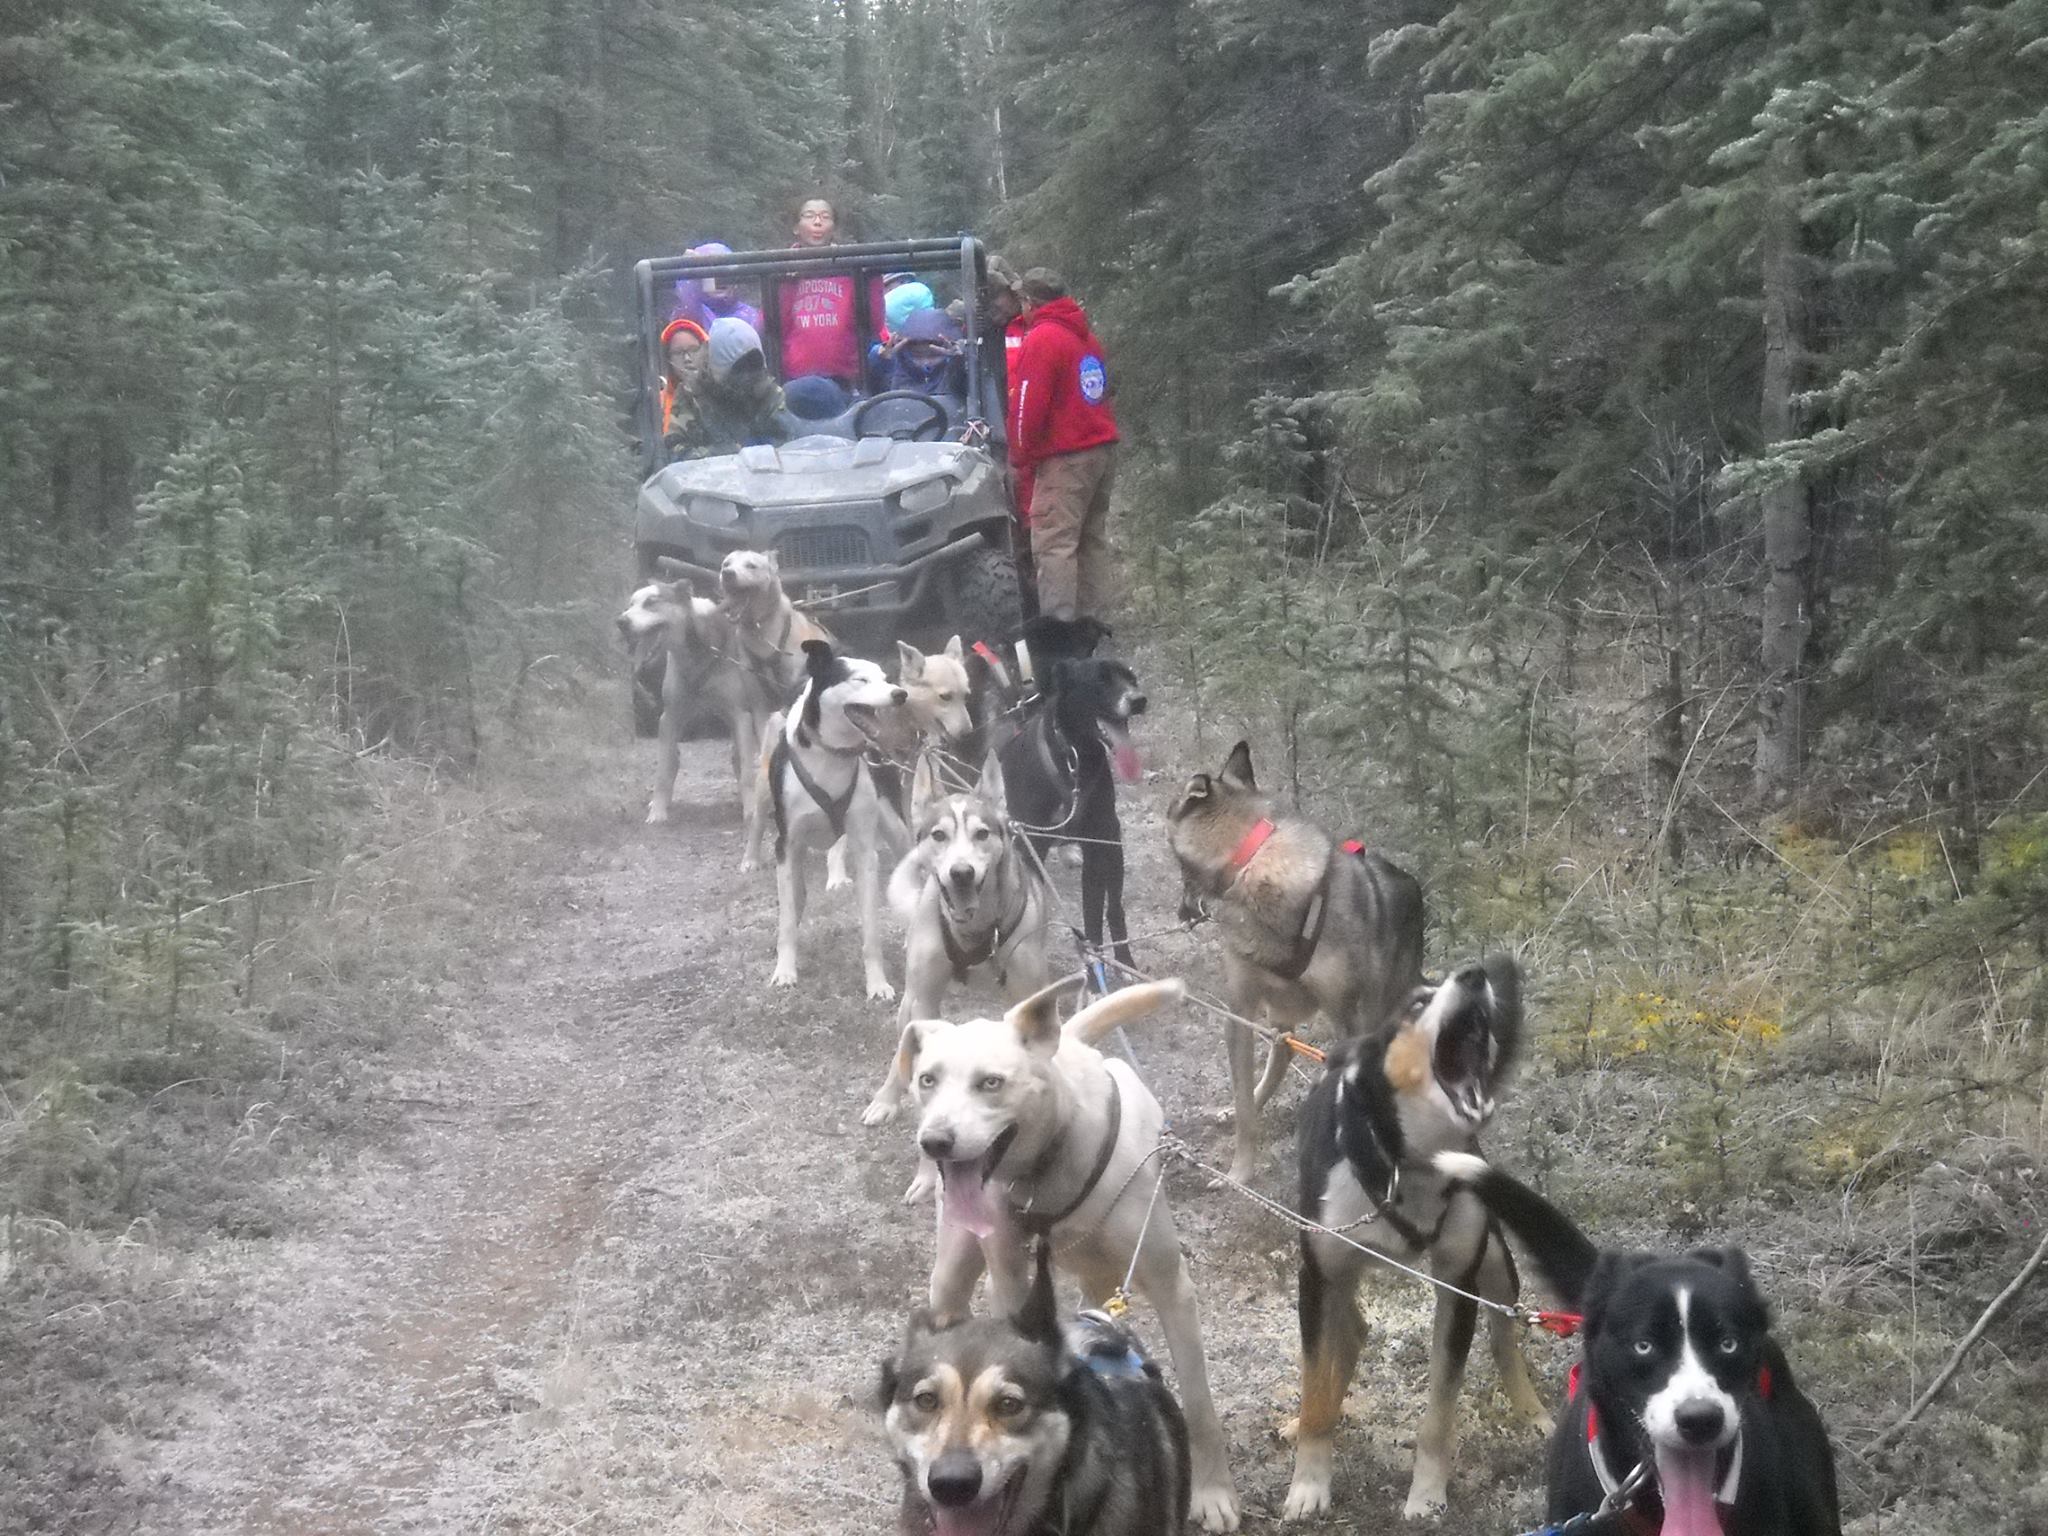 Rob Fabian with students running dogs by ATV.